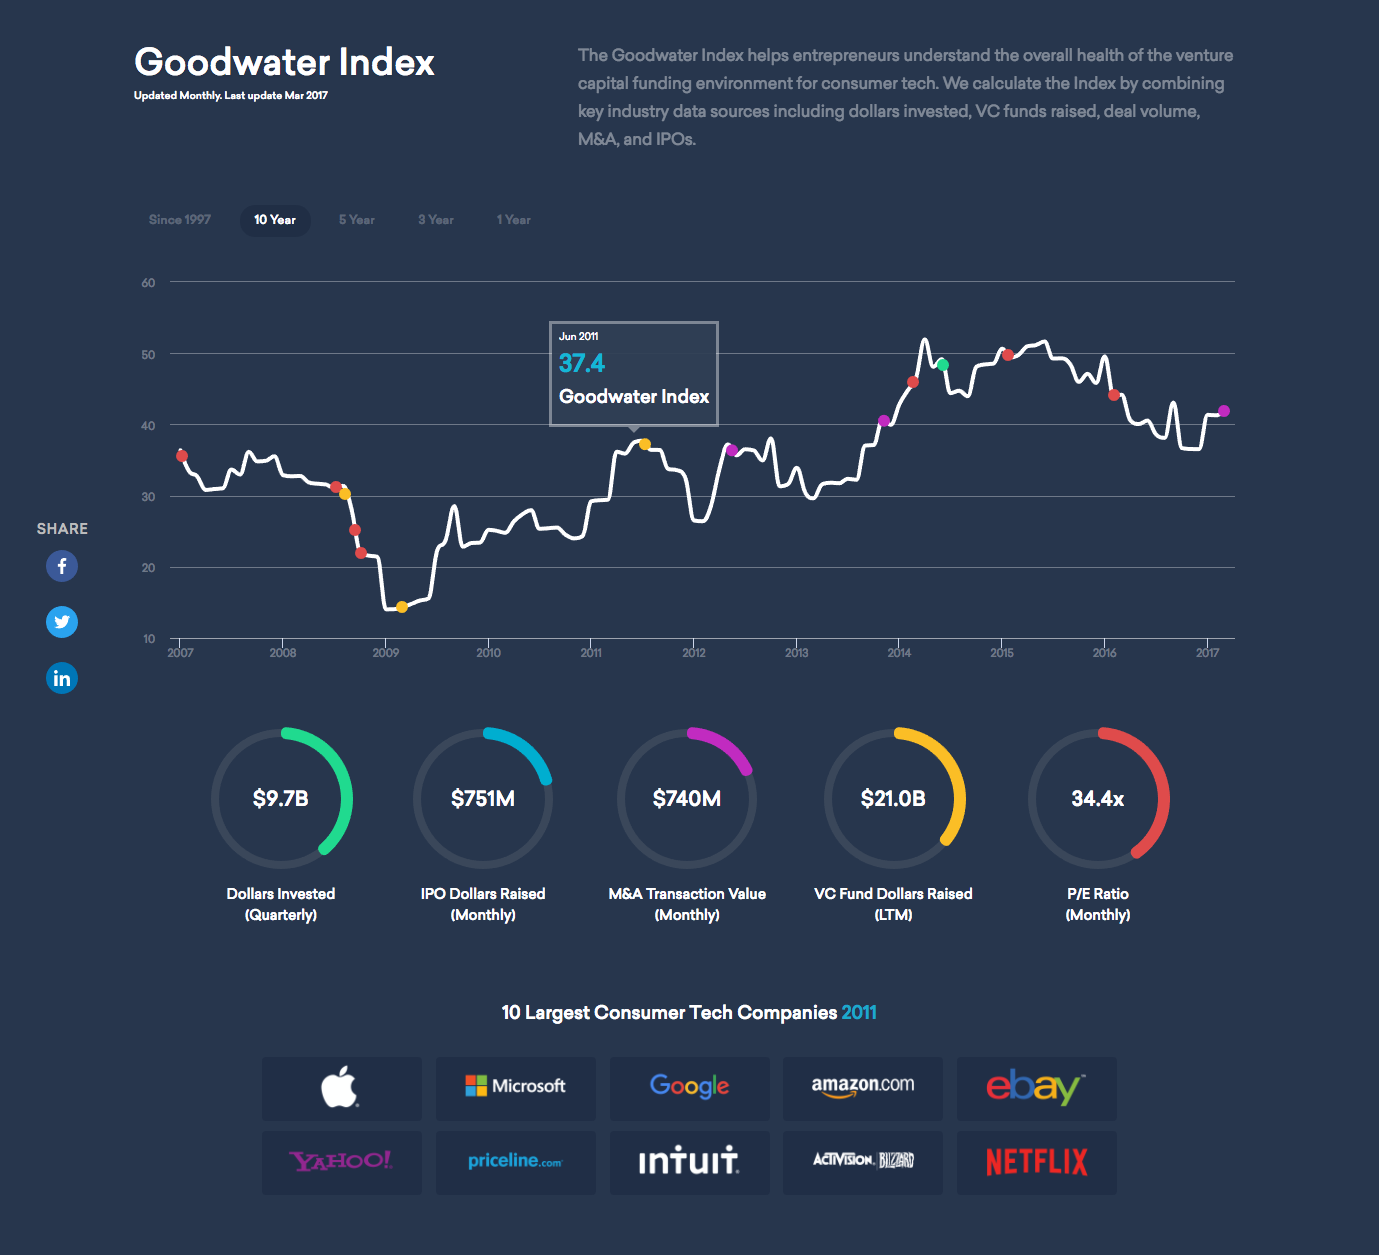 Goodwater Index